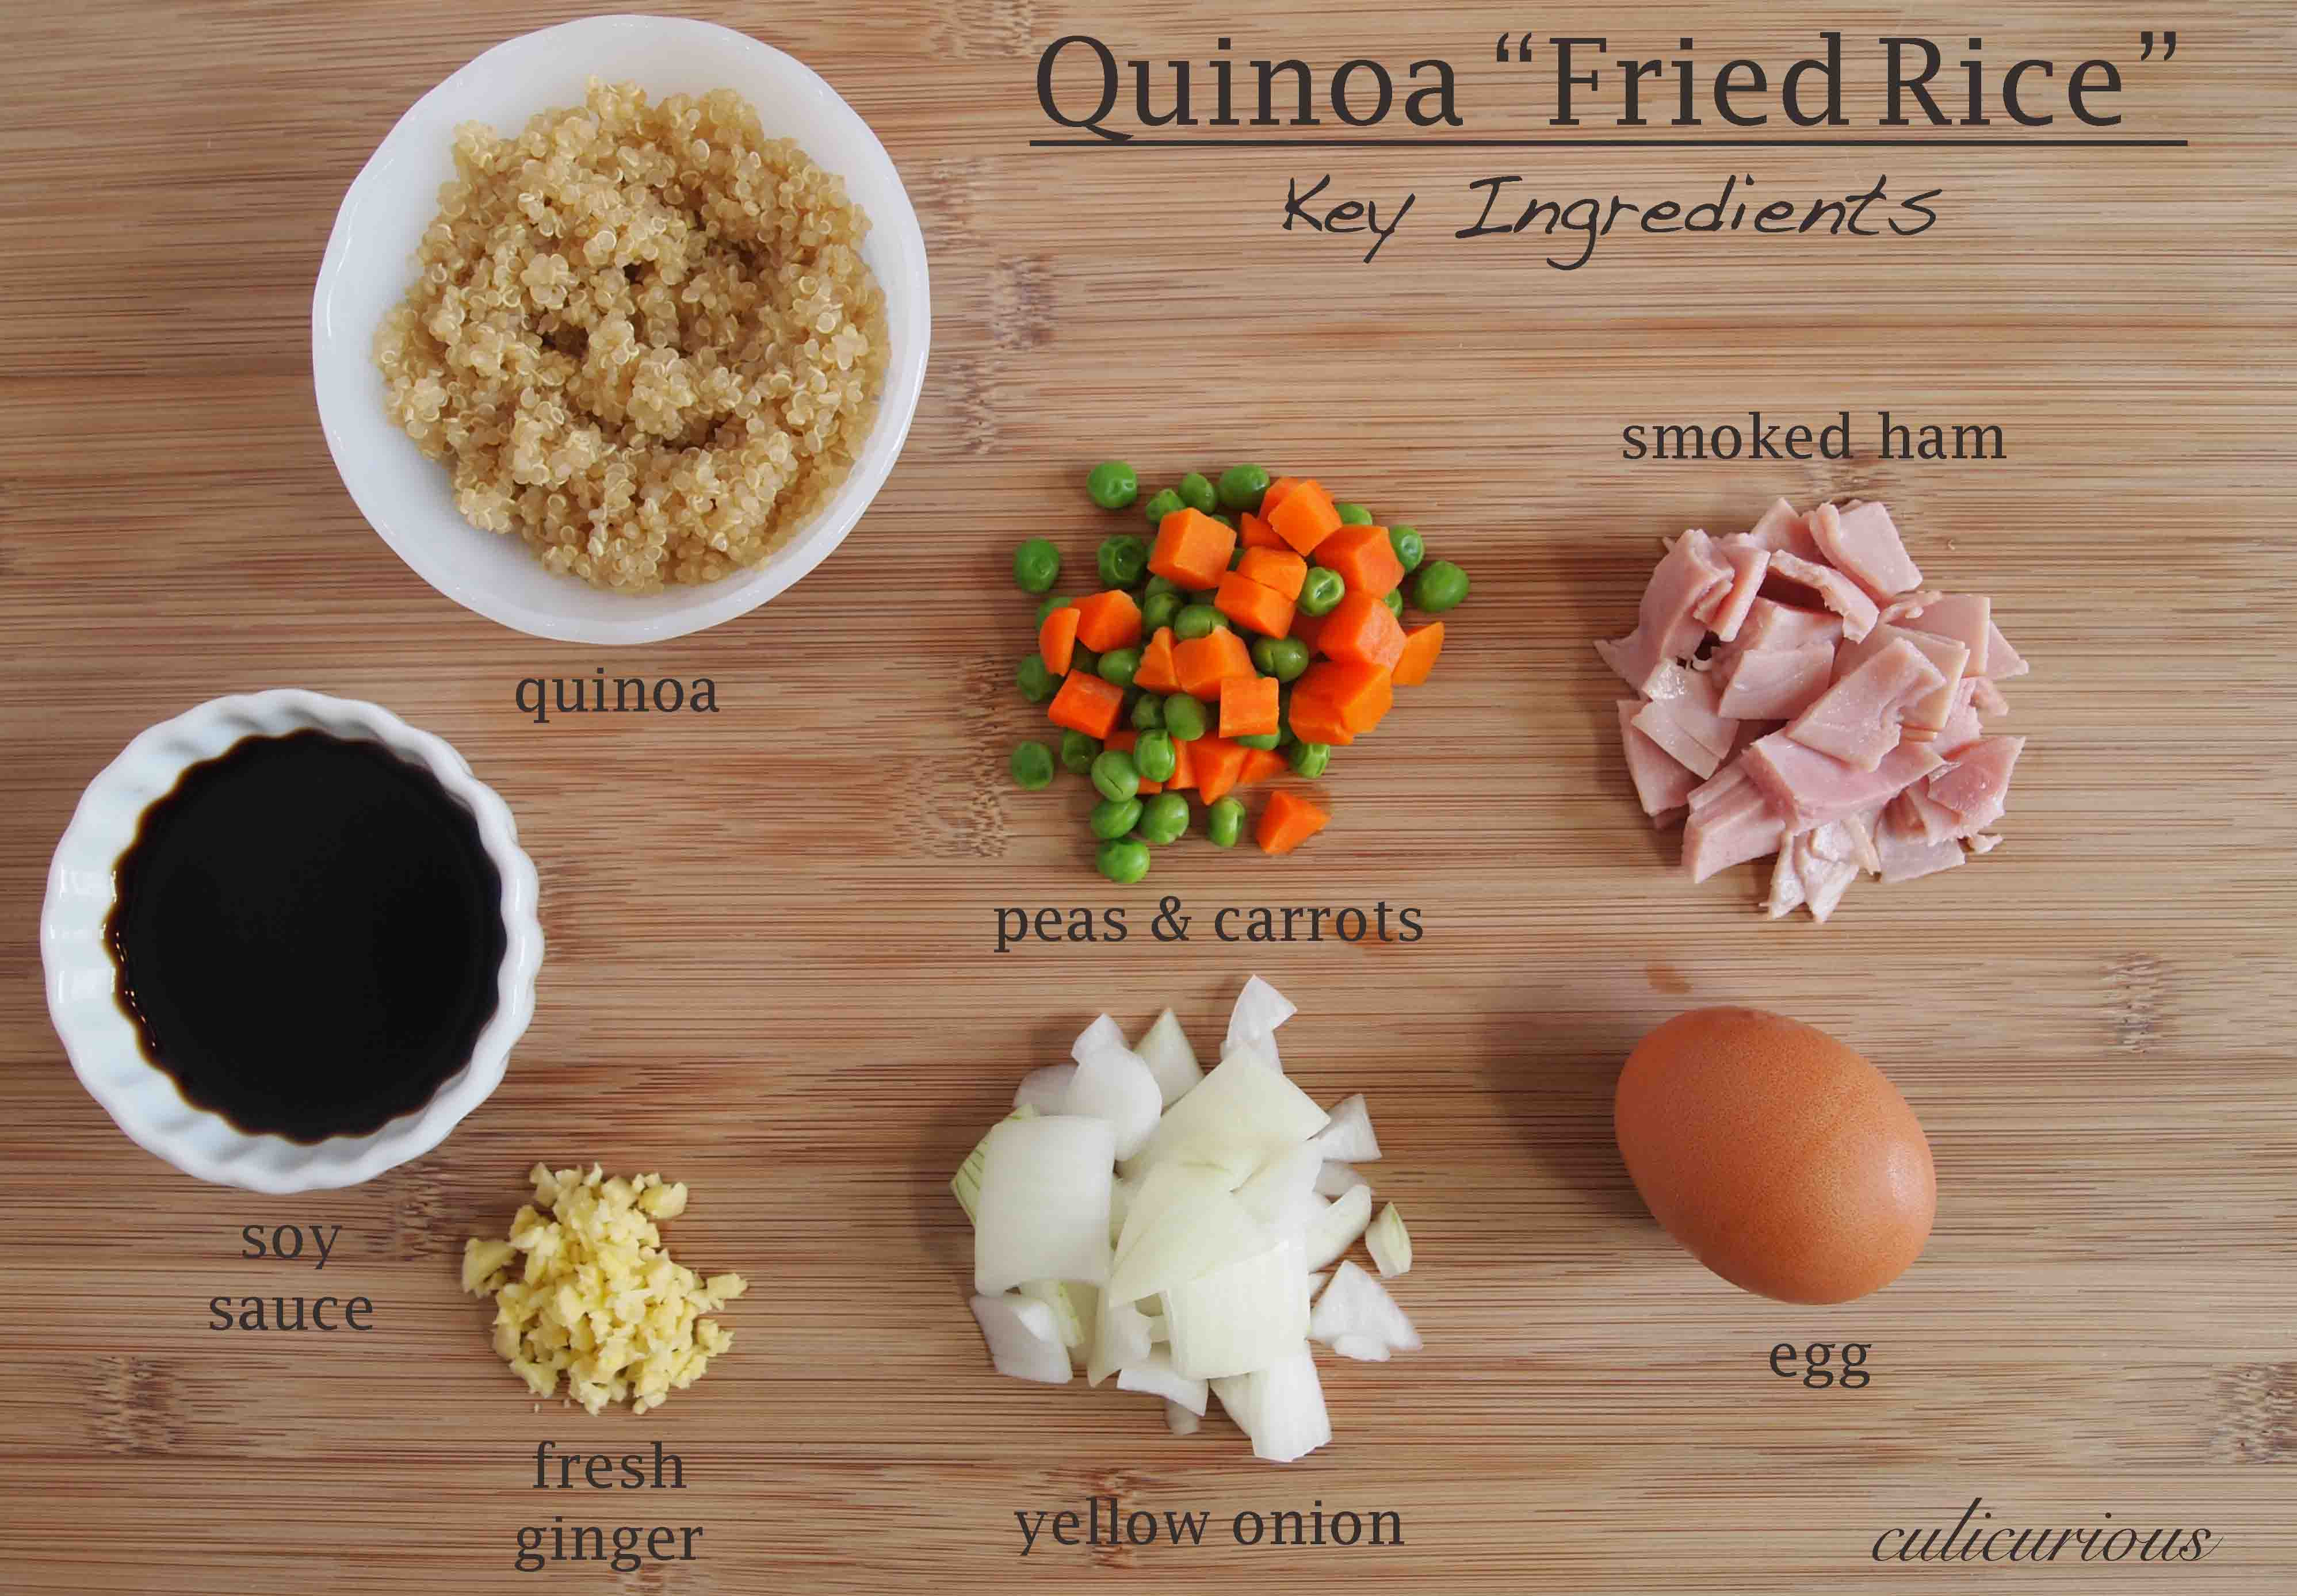 Fried Rice Ingredients
 Quinoa "Fried Rice" Recipe